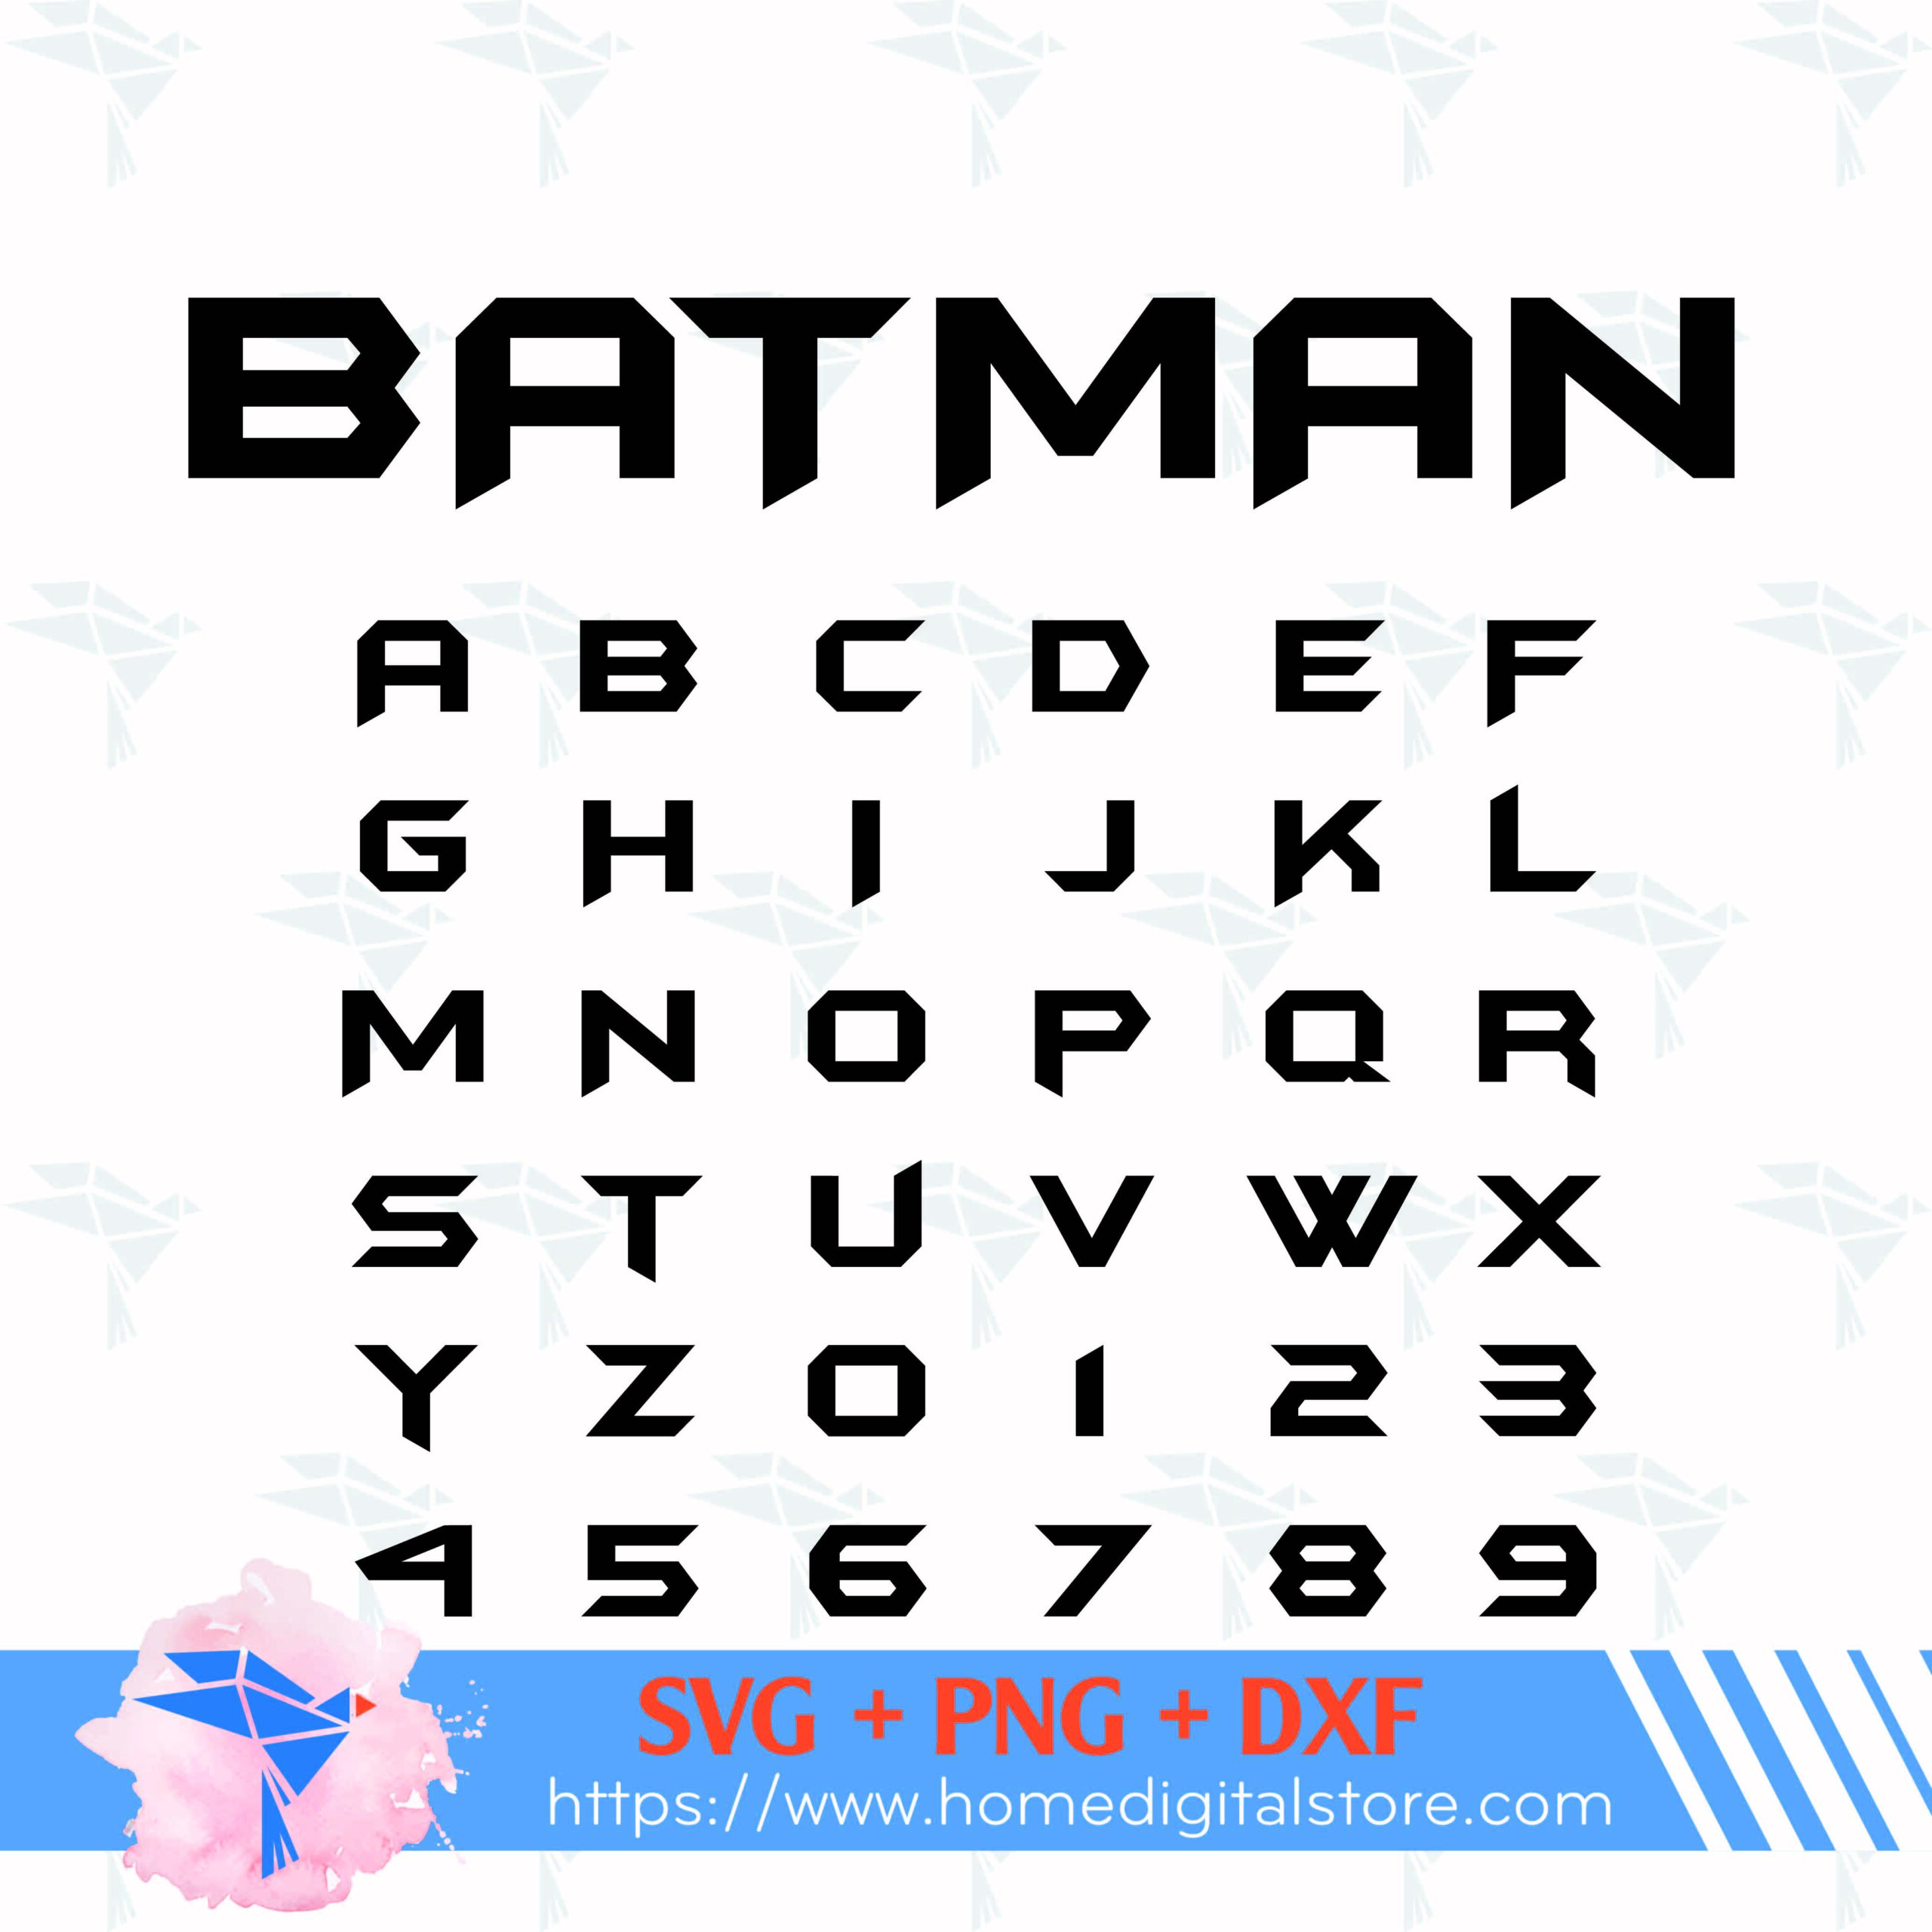 Batman Font SVG, PNG, DXF for Cutting, Printing, Designing or more